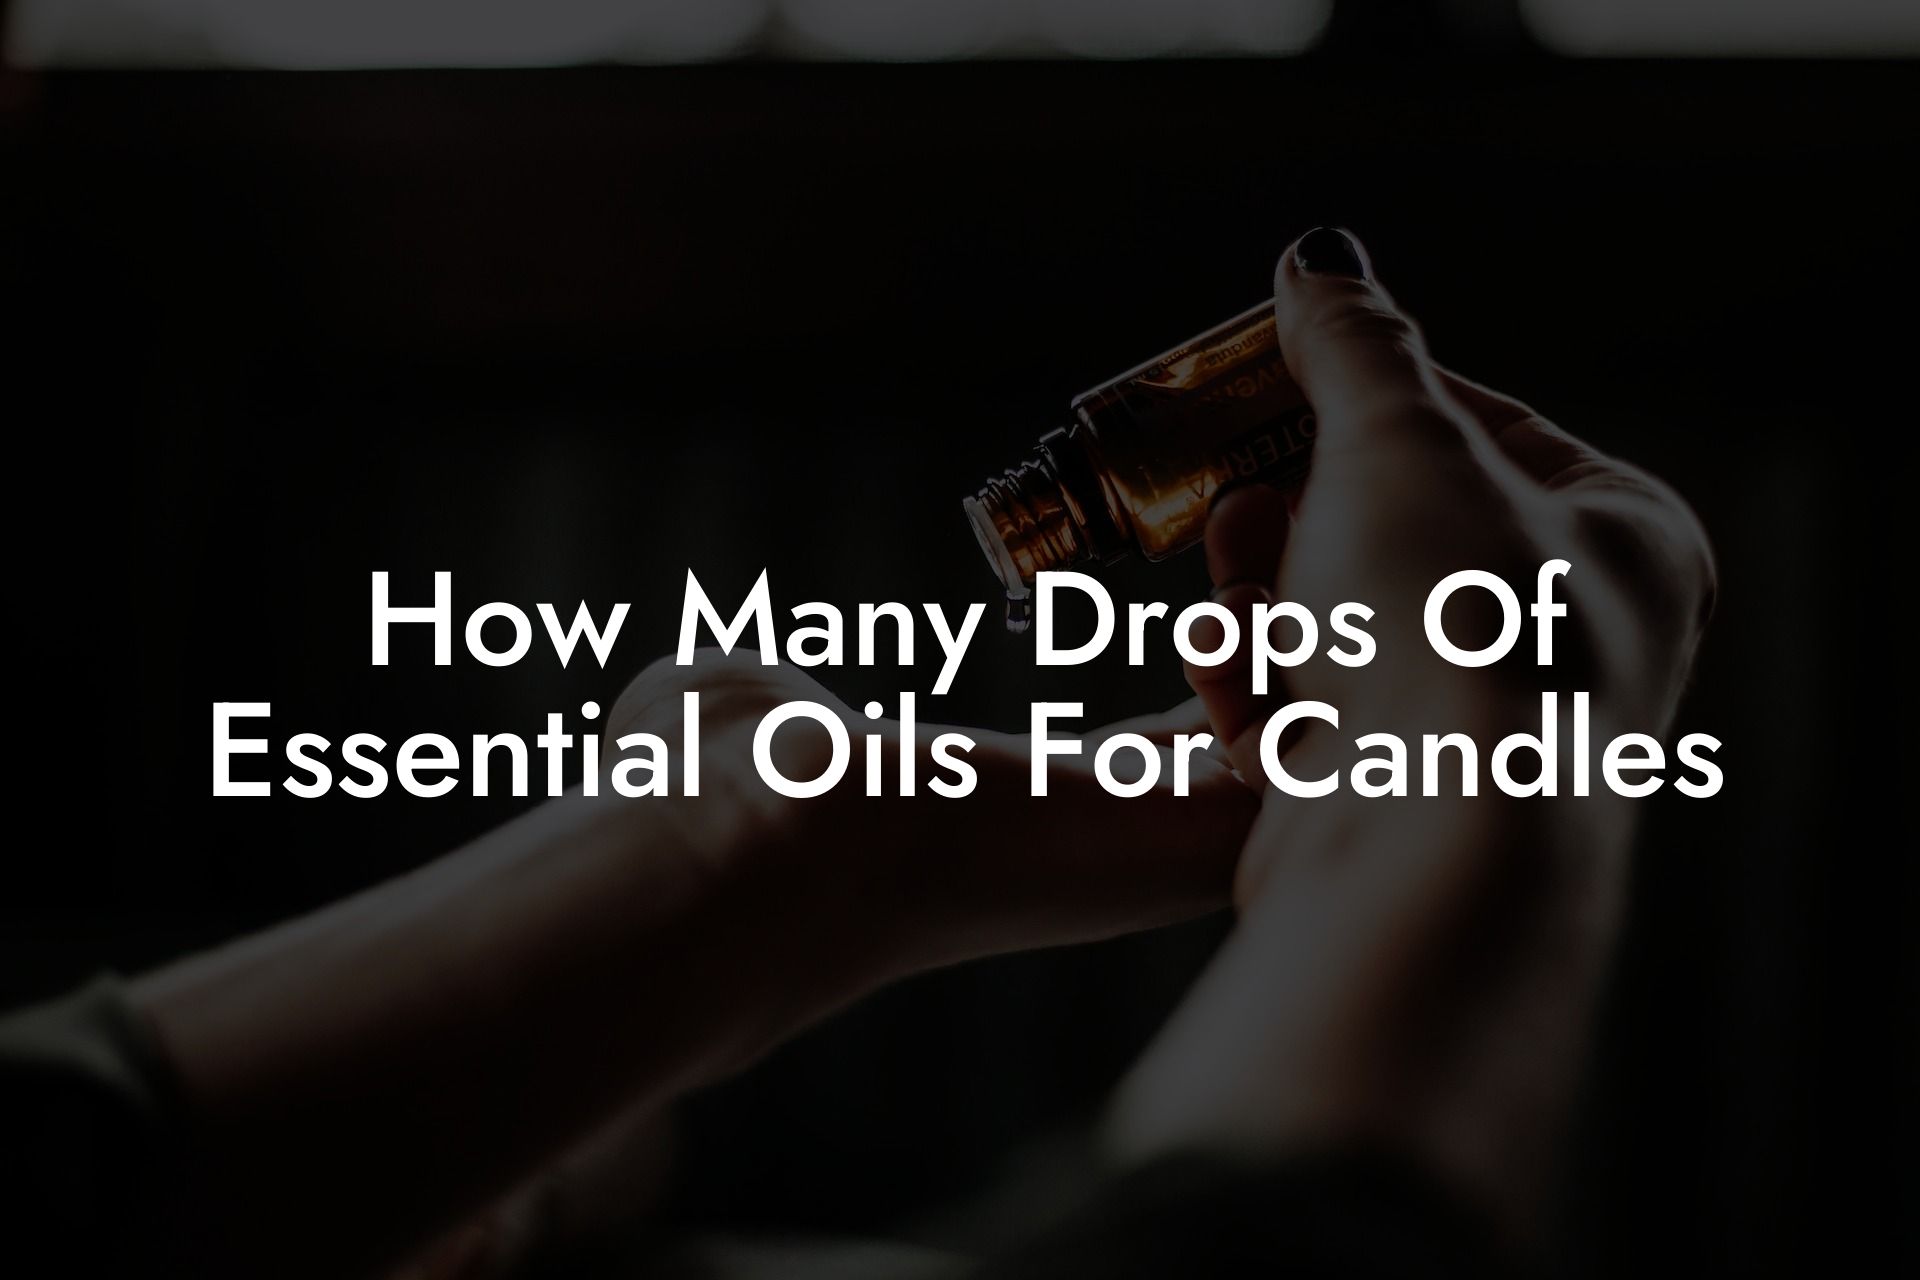 How Many Drops Of Essential Oils For Candles